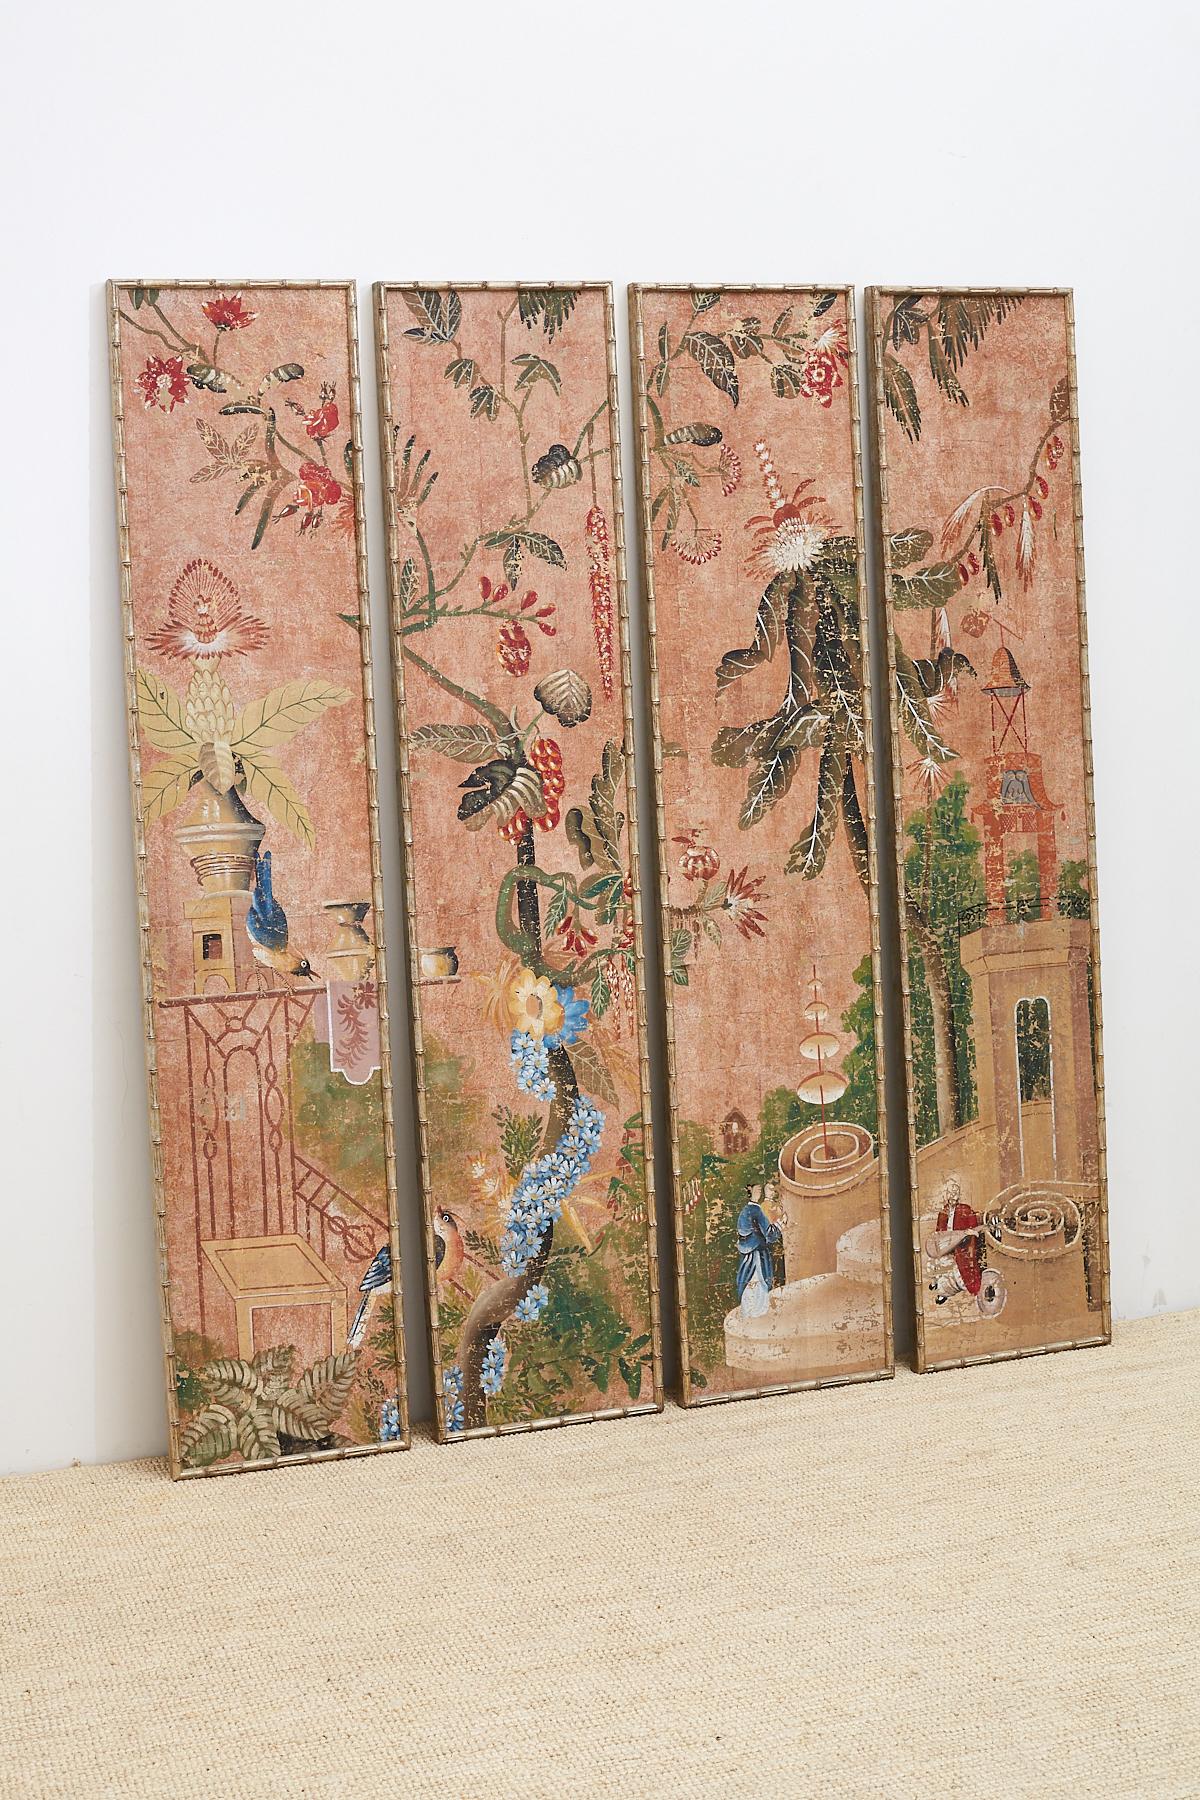 Magnificent set of four painted faux bamboo framed panels decorated in the chinoiserie revival taste of the Early European 20th century. Featuring hand-painted scenes of flora and fauna among pagoda buildings. Colorful lacquer with a distressed